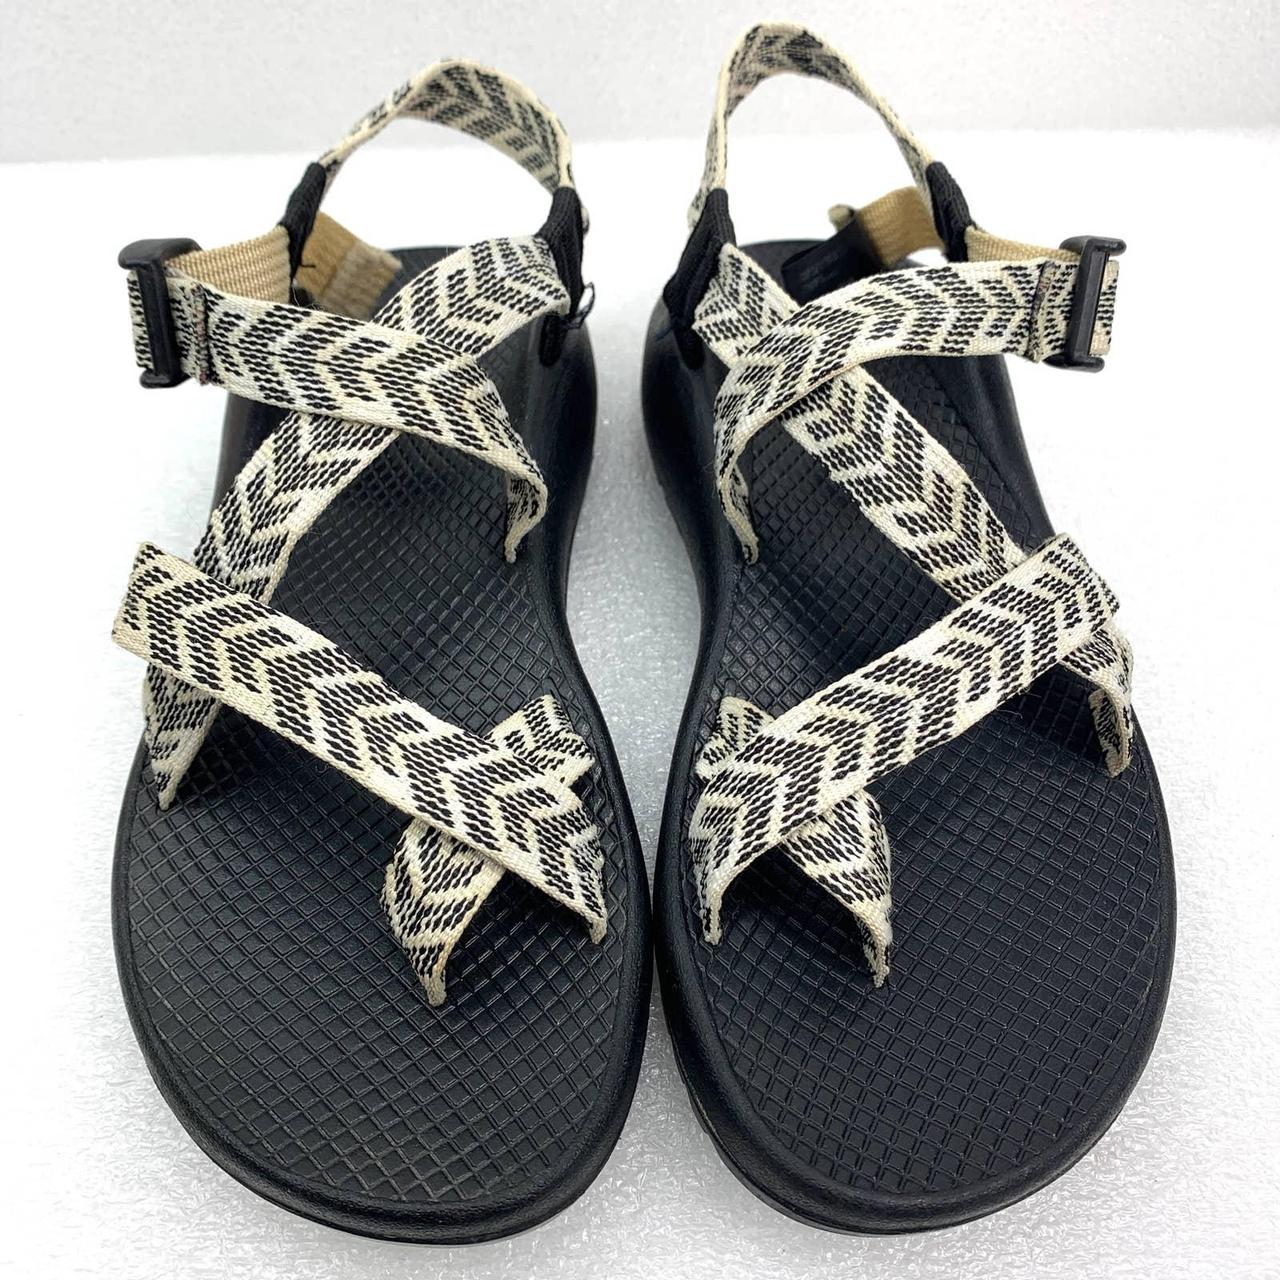 Chaco Women's Black and White Sandals | Depop